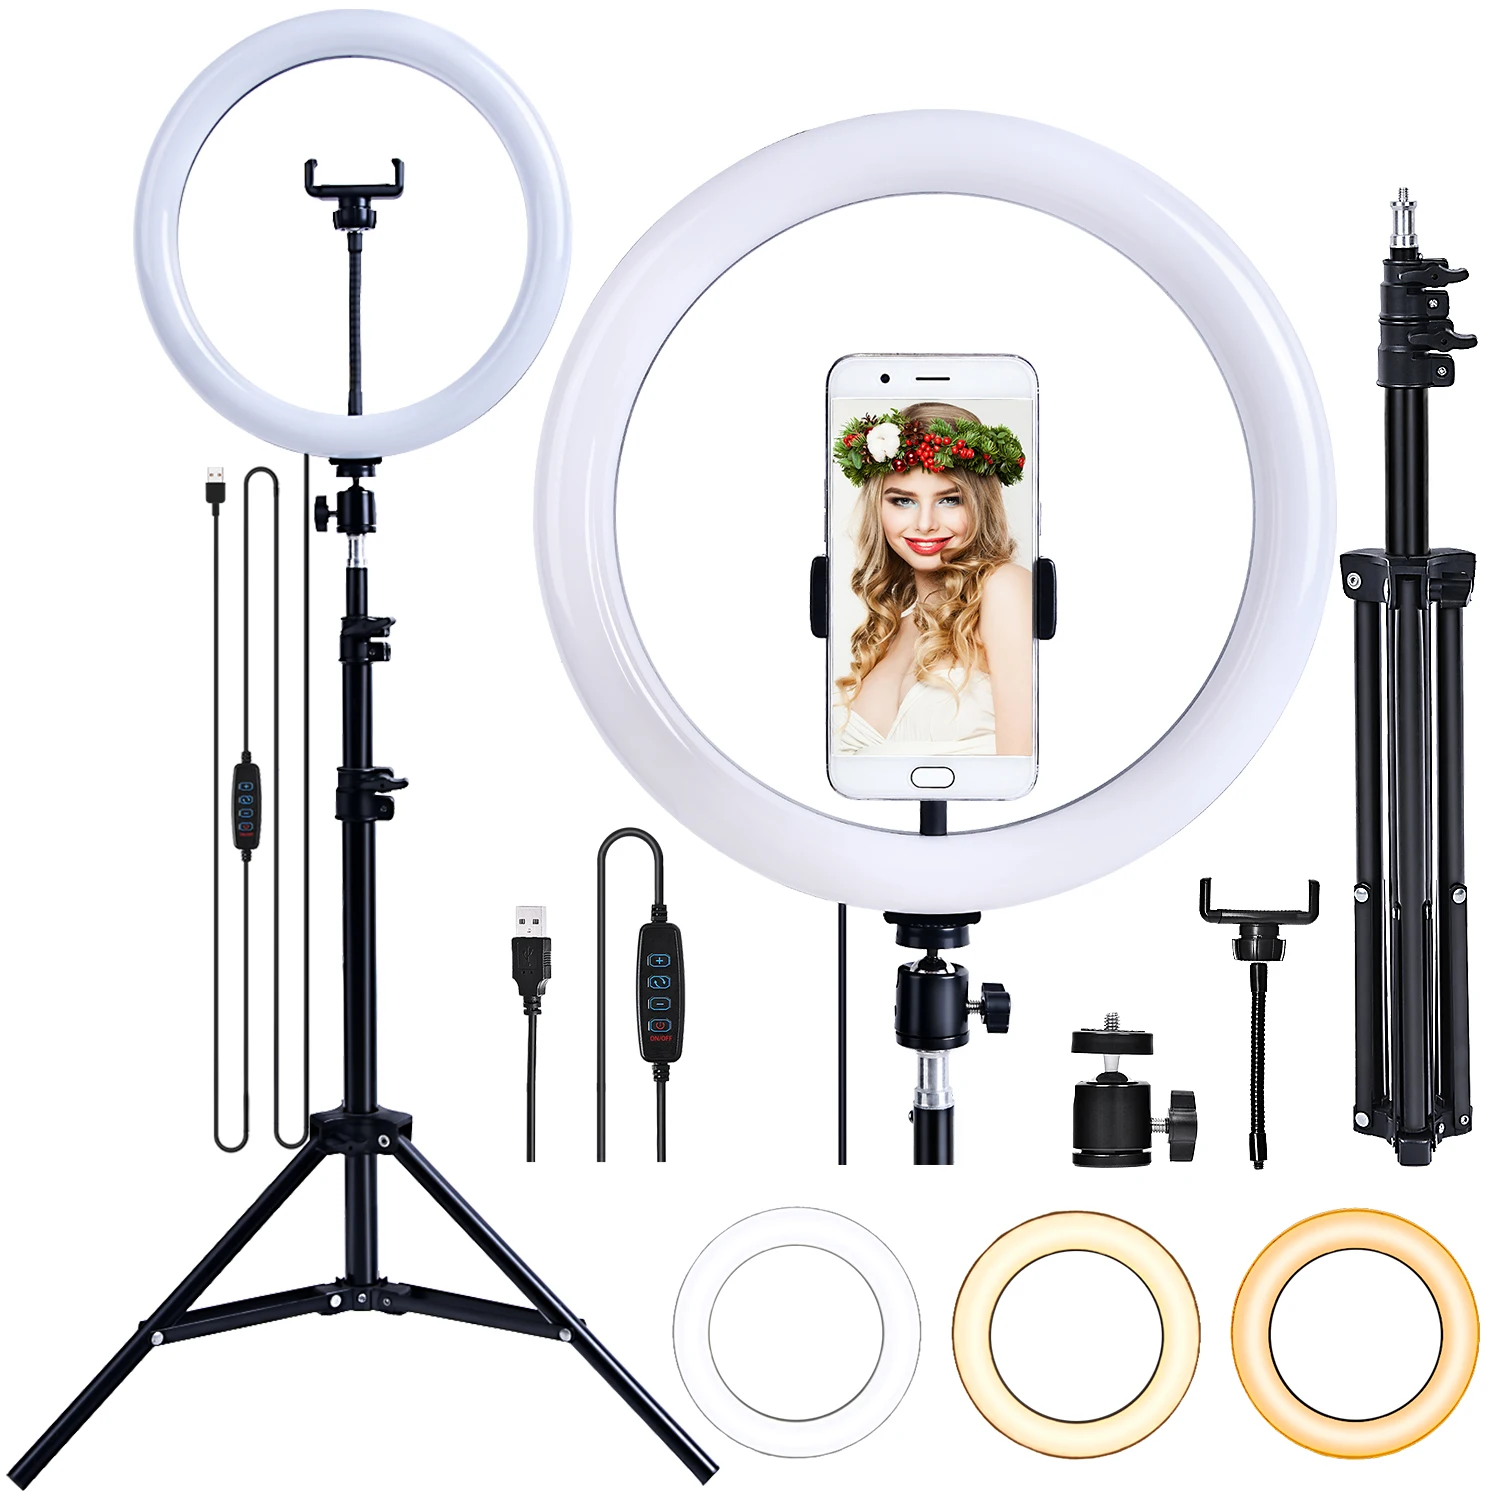 

FOSOTO 10 inch led selfie Ring light 26cm Video lamp photographic lighting with Tripod stand And phone holder For makeup Youtube